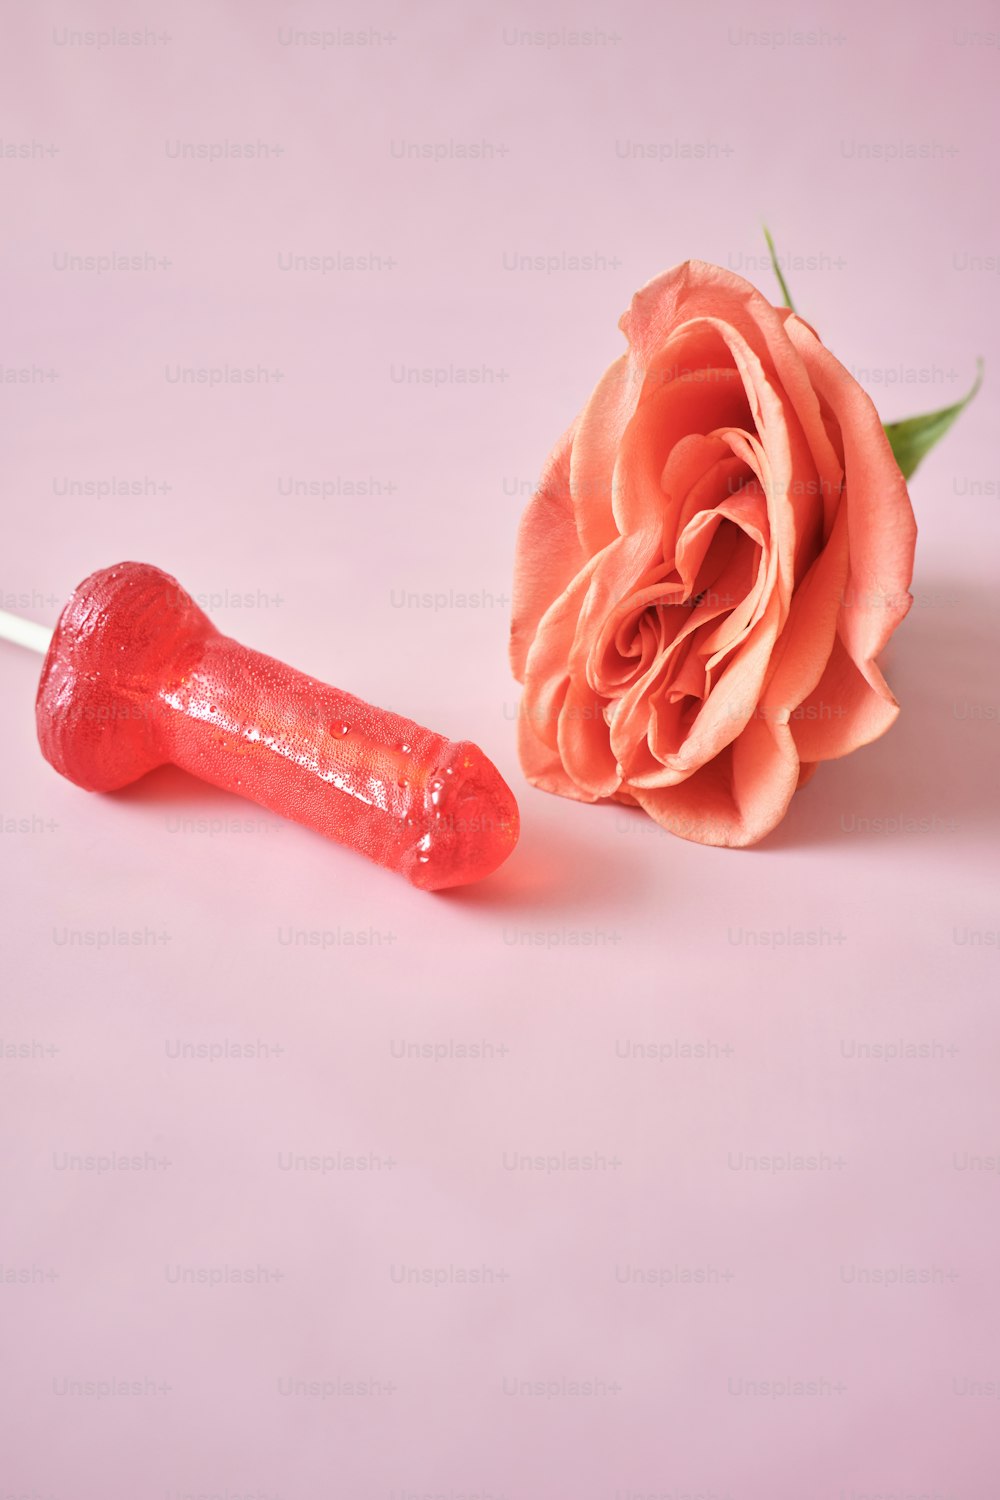 a rose and a candy bar on a pink background